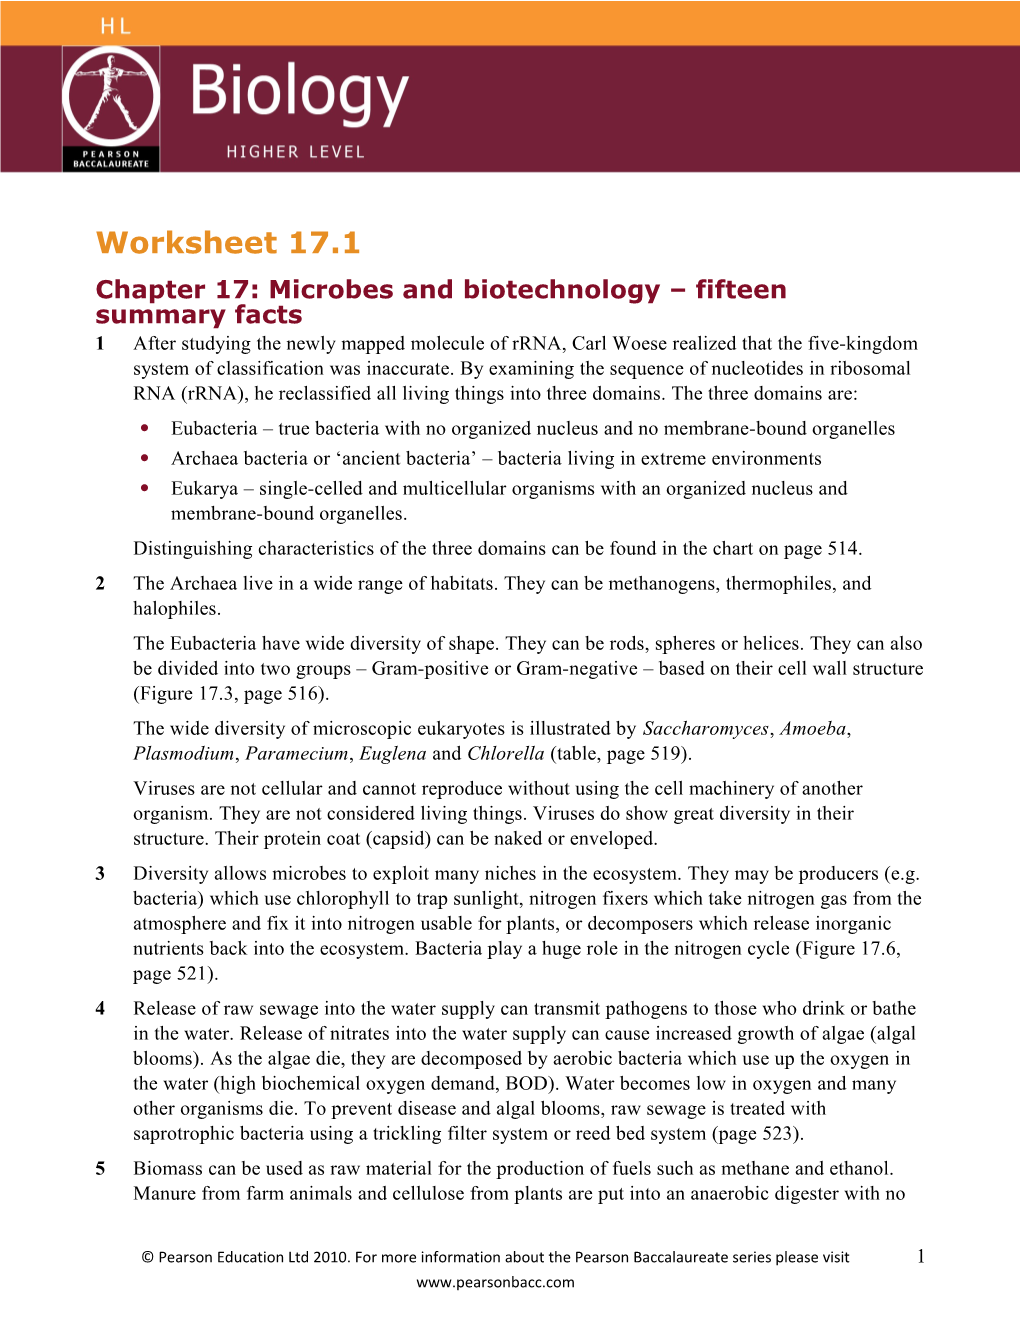 Chapter 17: Microbes and Biotechnology Fifteen Summary Facts